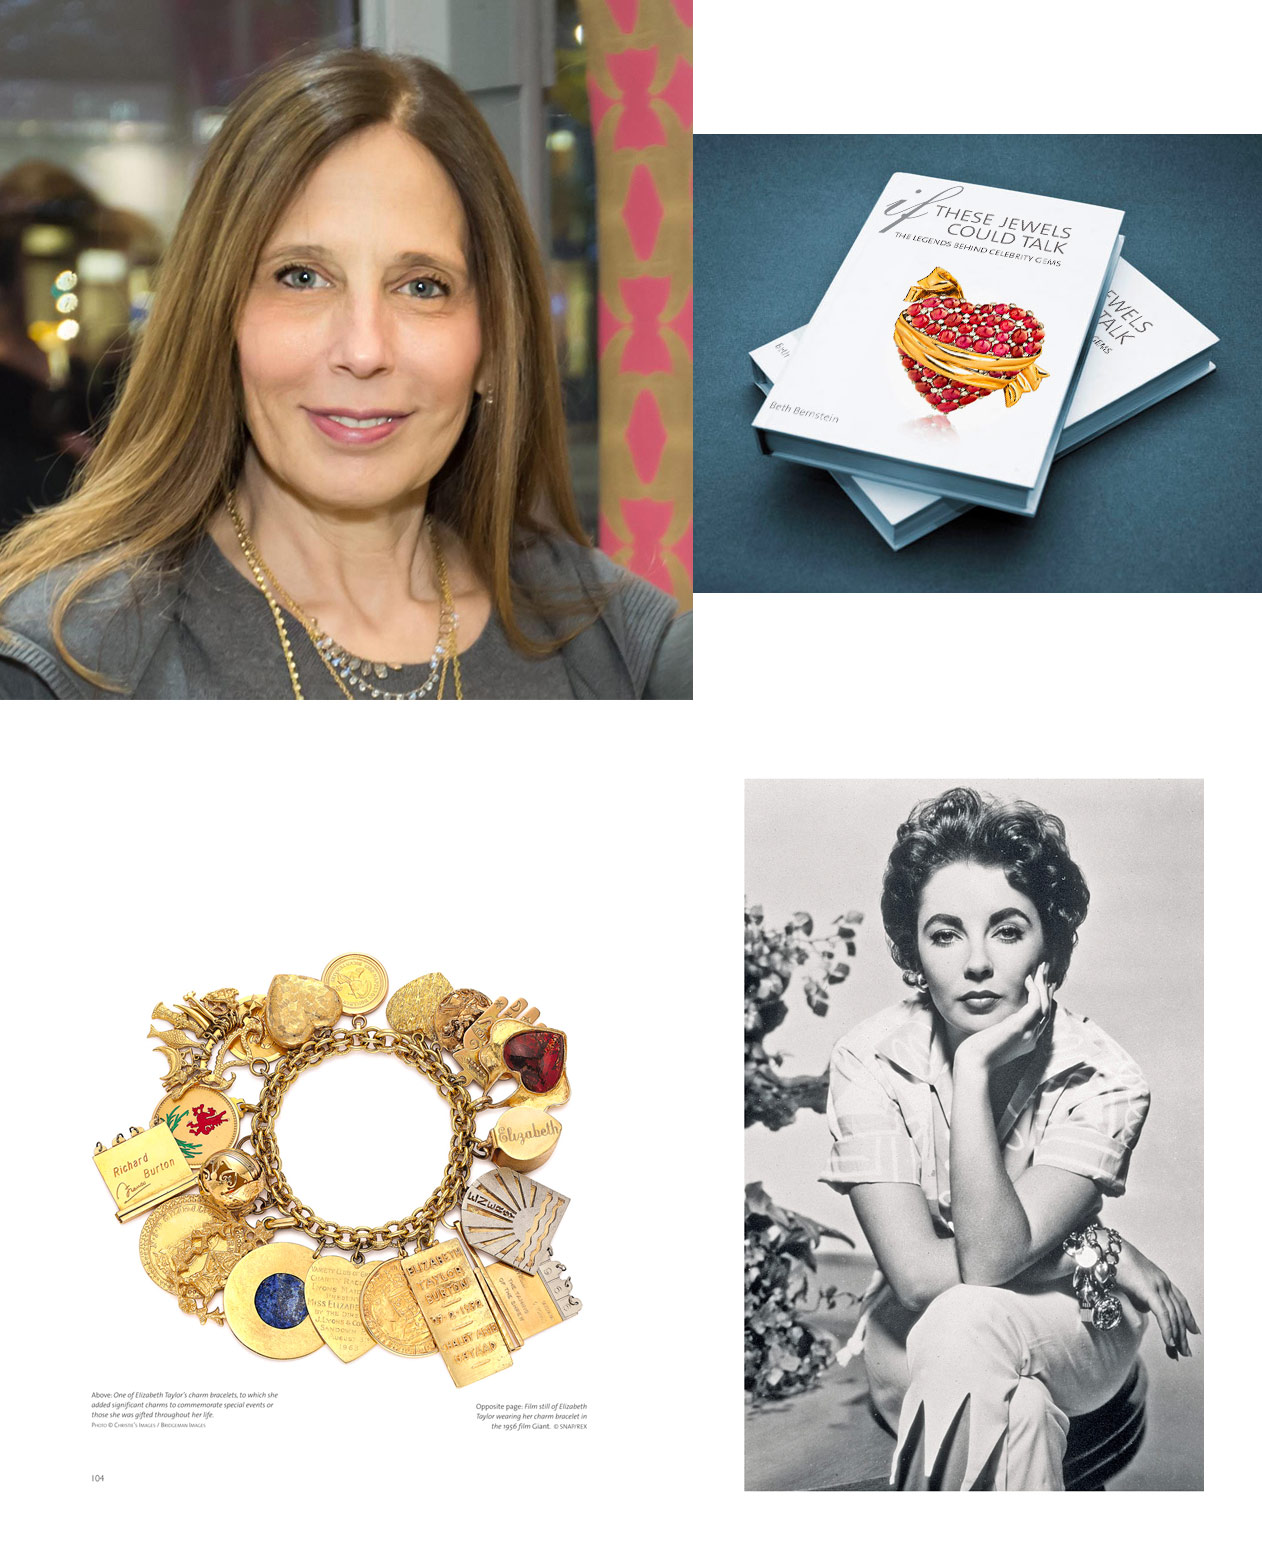 Beth Berstein will release her fourth book in 2021 focusing on antique jewellery from the Georgian era through to the beginning of the 20th century and how it can be paired with contemporary fashions